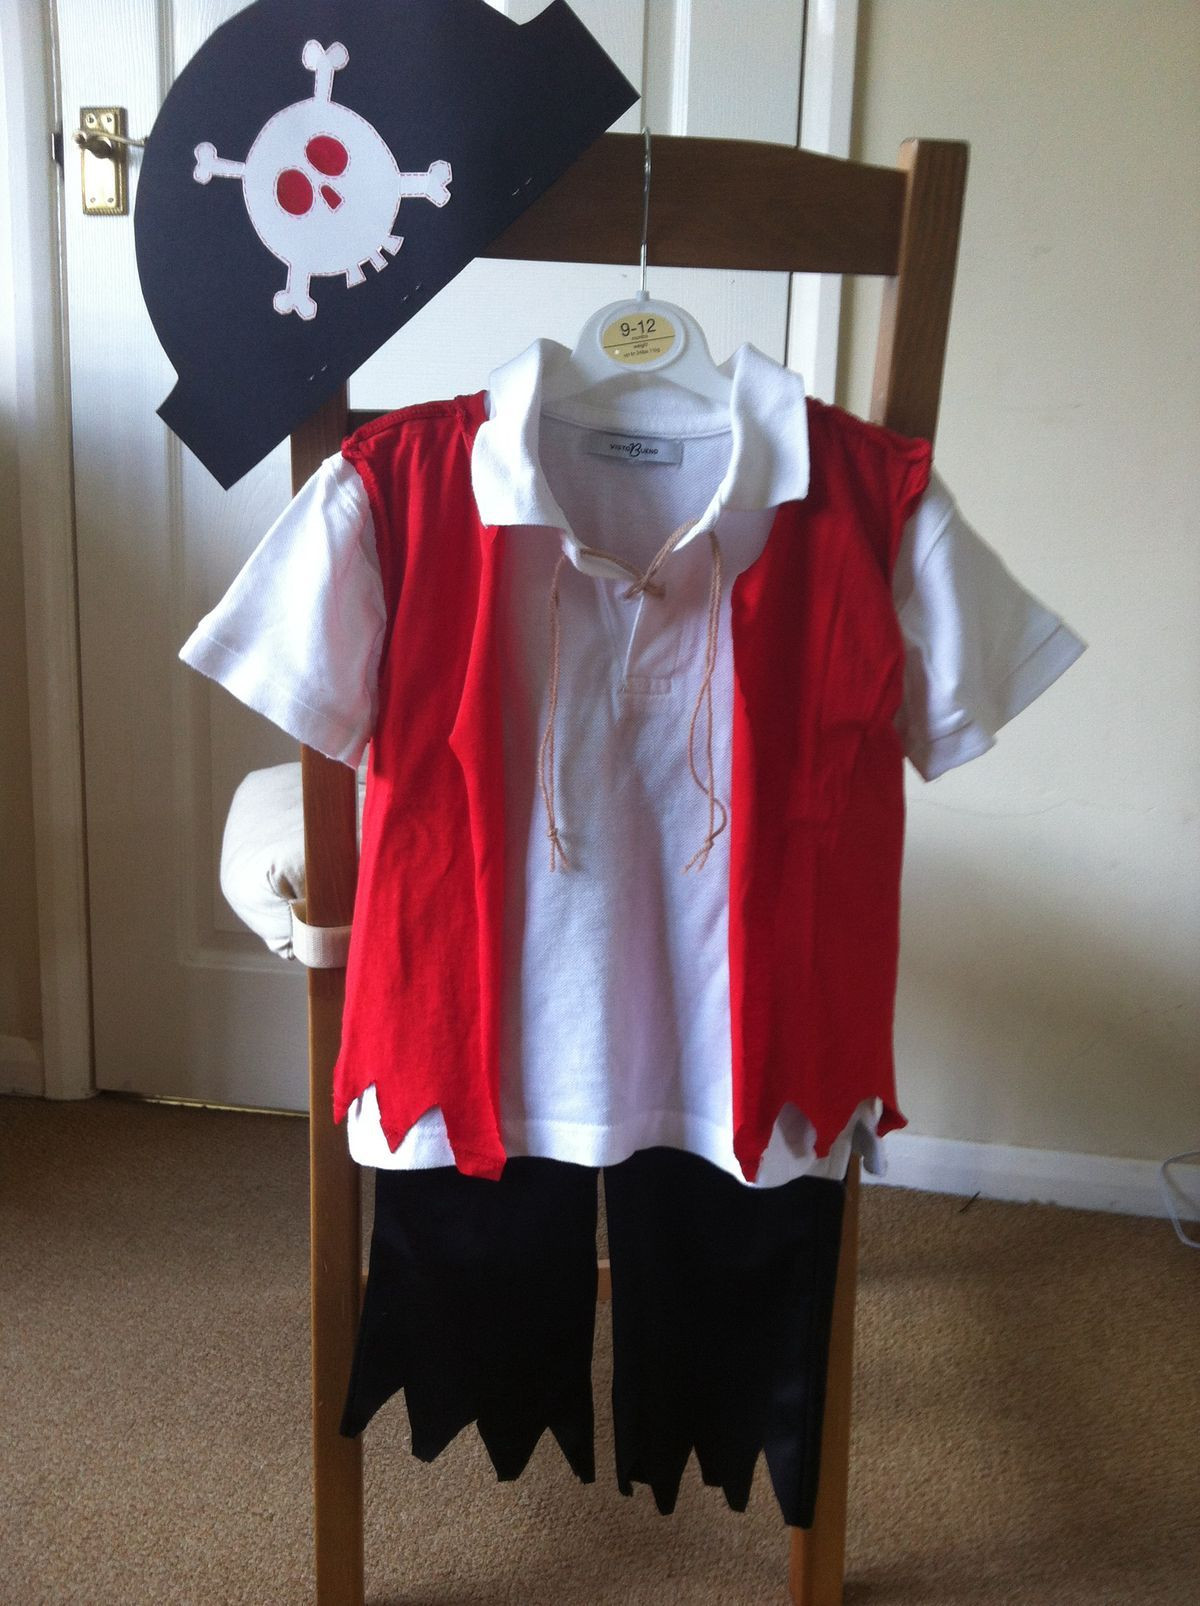 Diy Child Pirate Costume
 Pin by Tracy Cleveland on Kid stuff